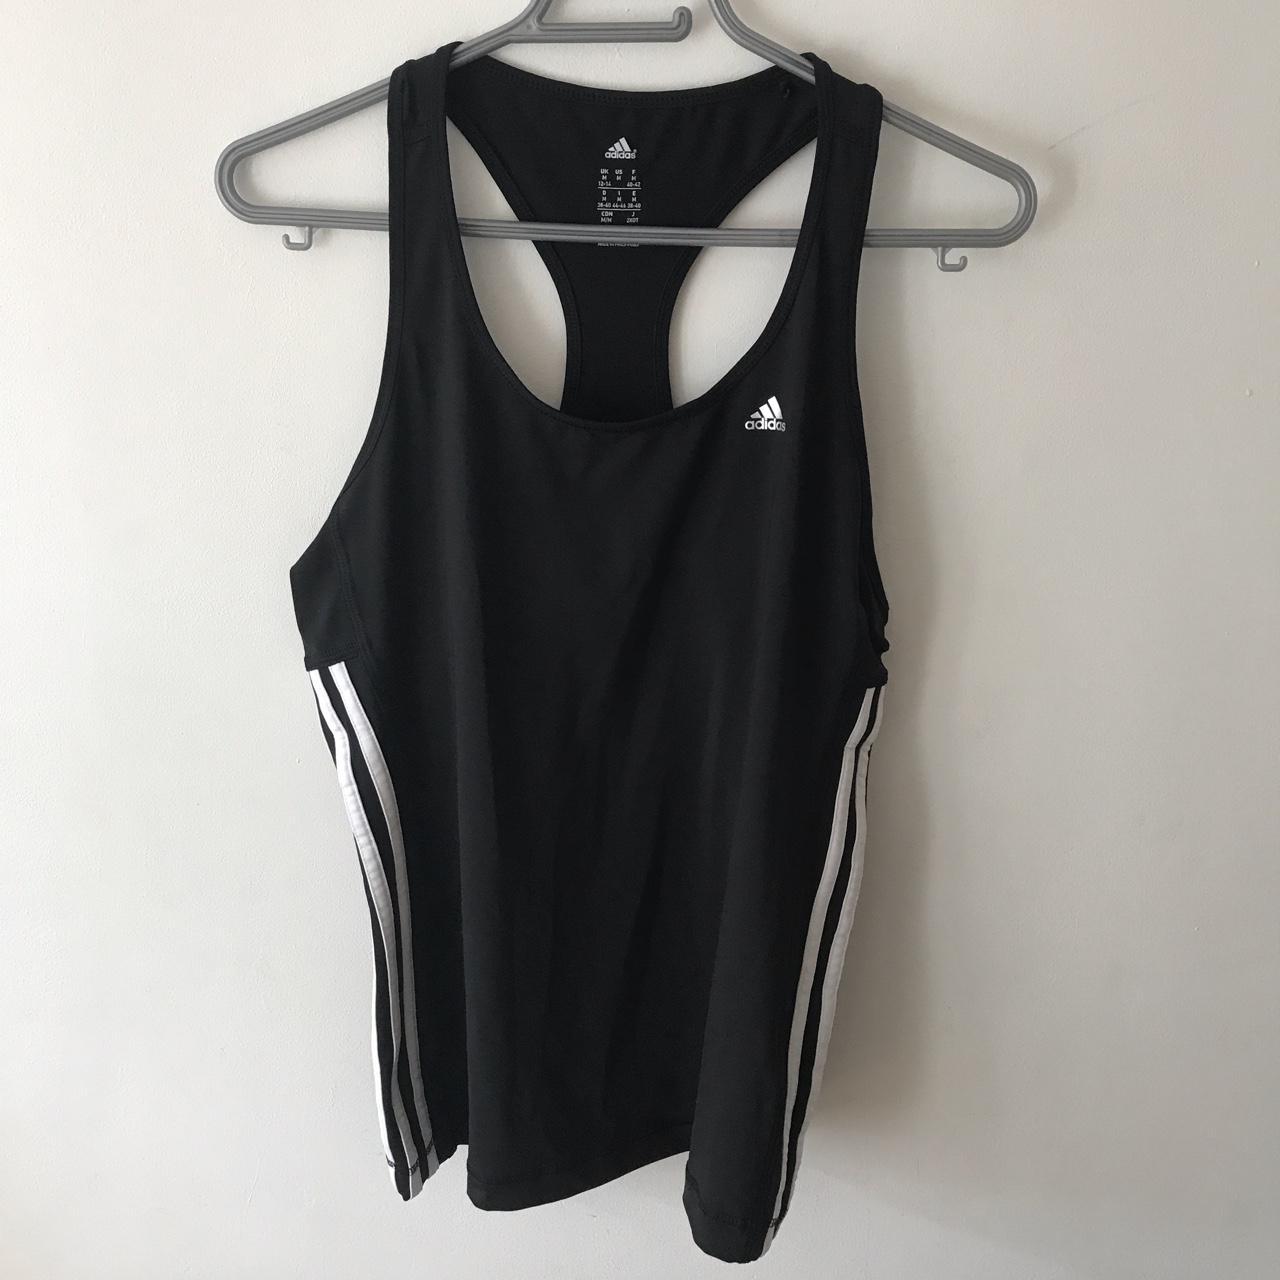 Black Adidas sports top with white stripes down the... - Depop